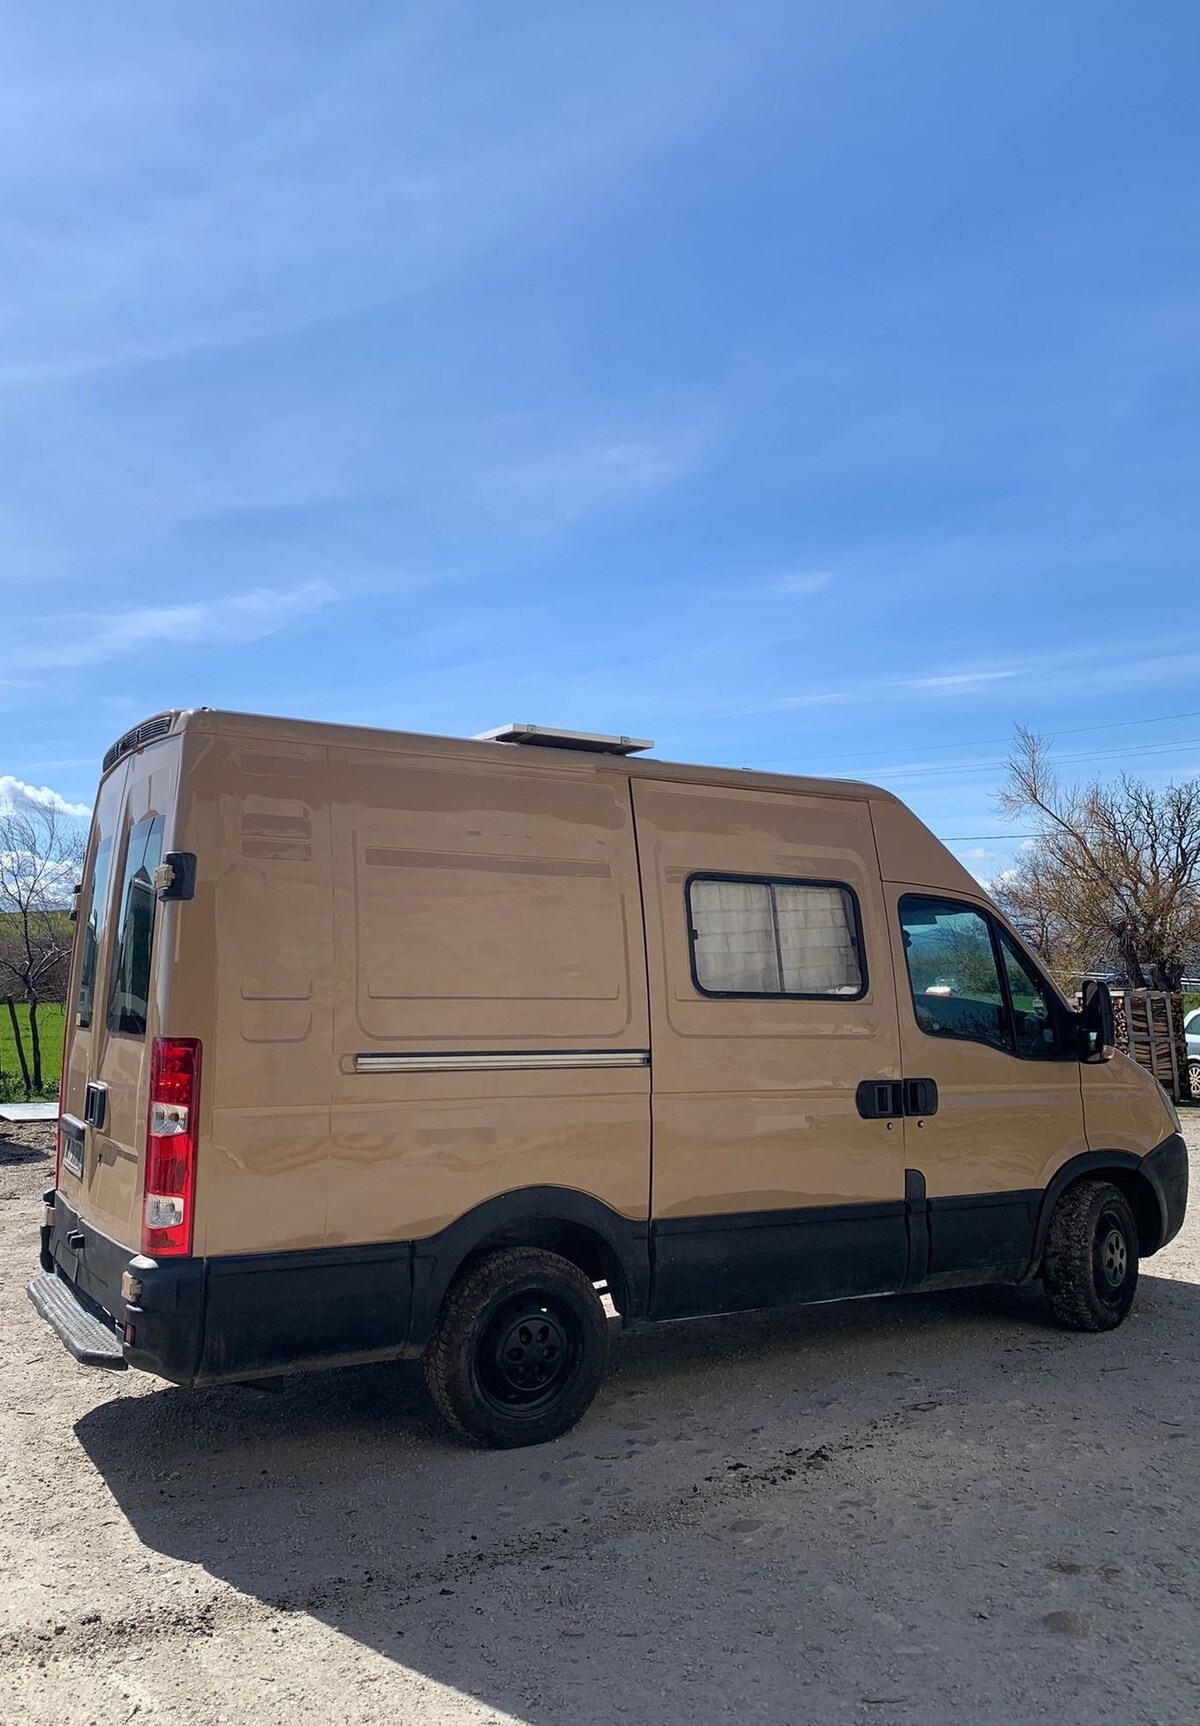 Your home on wheels in Italy